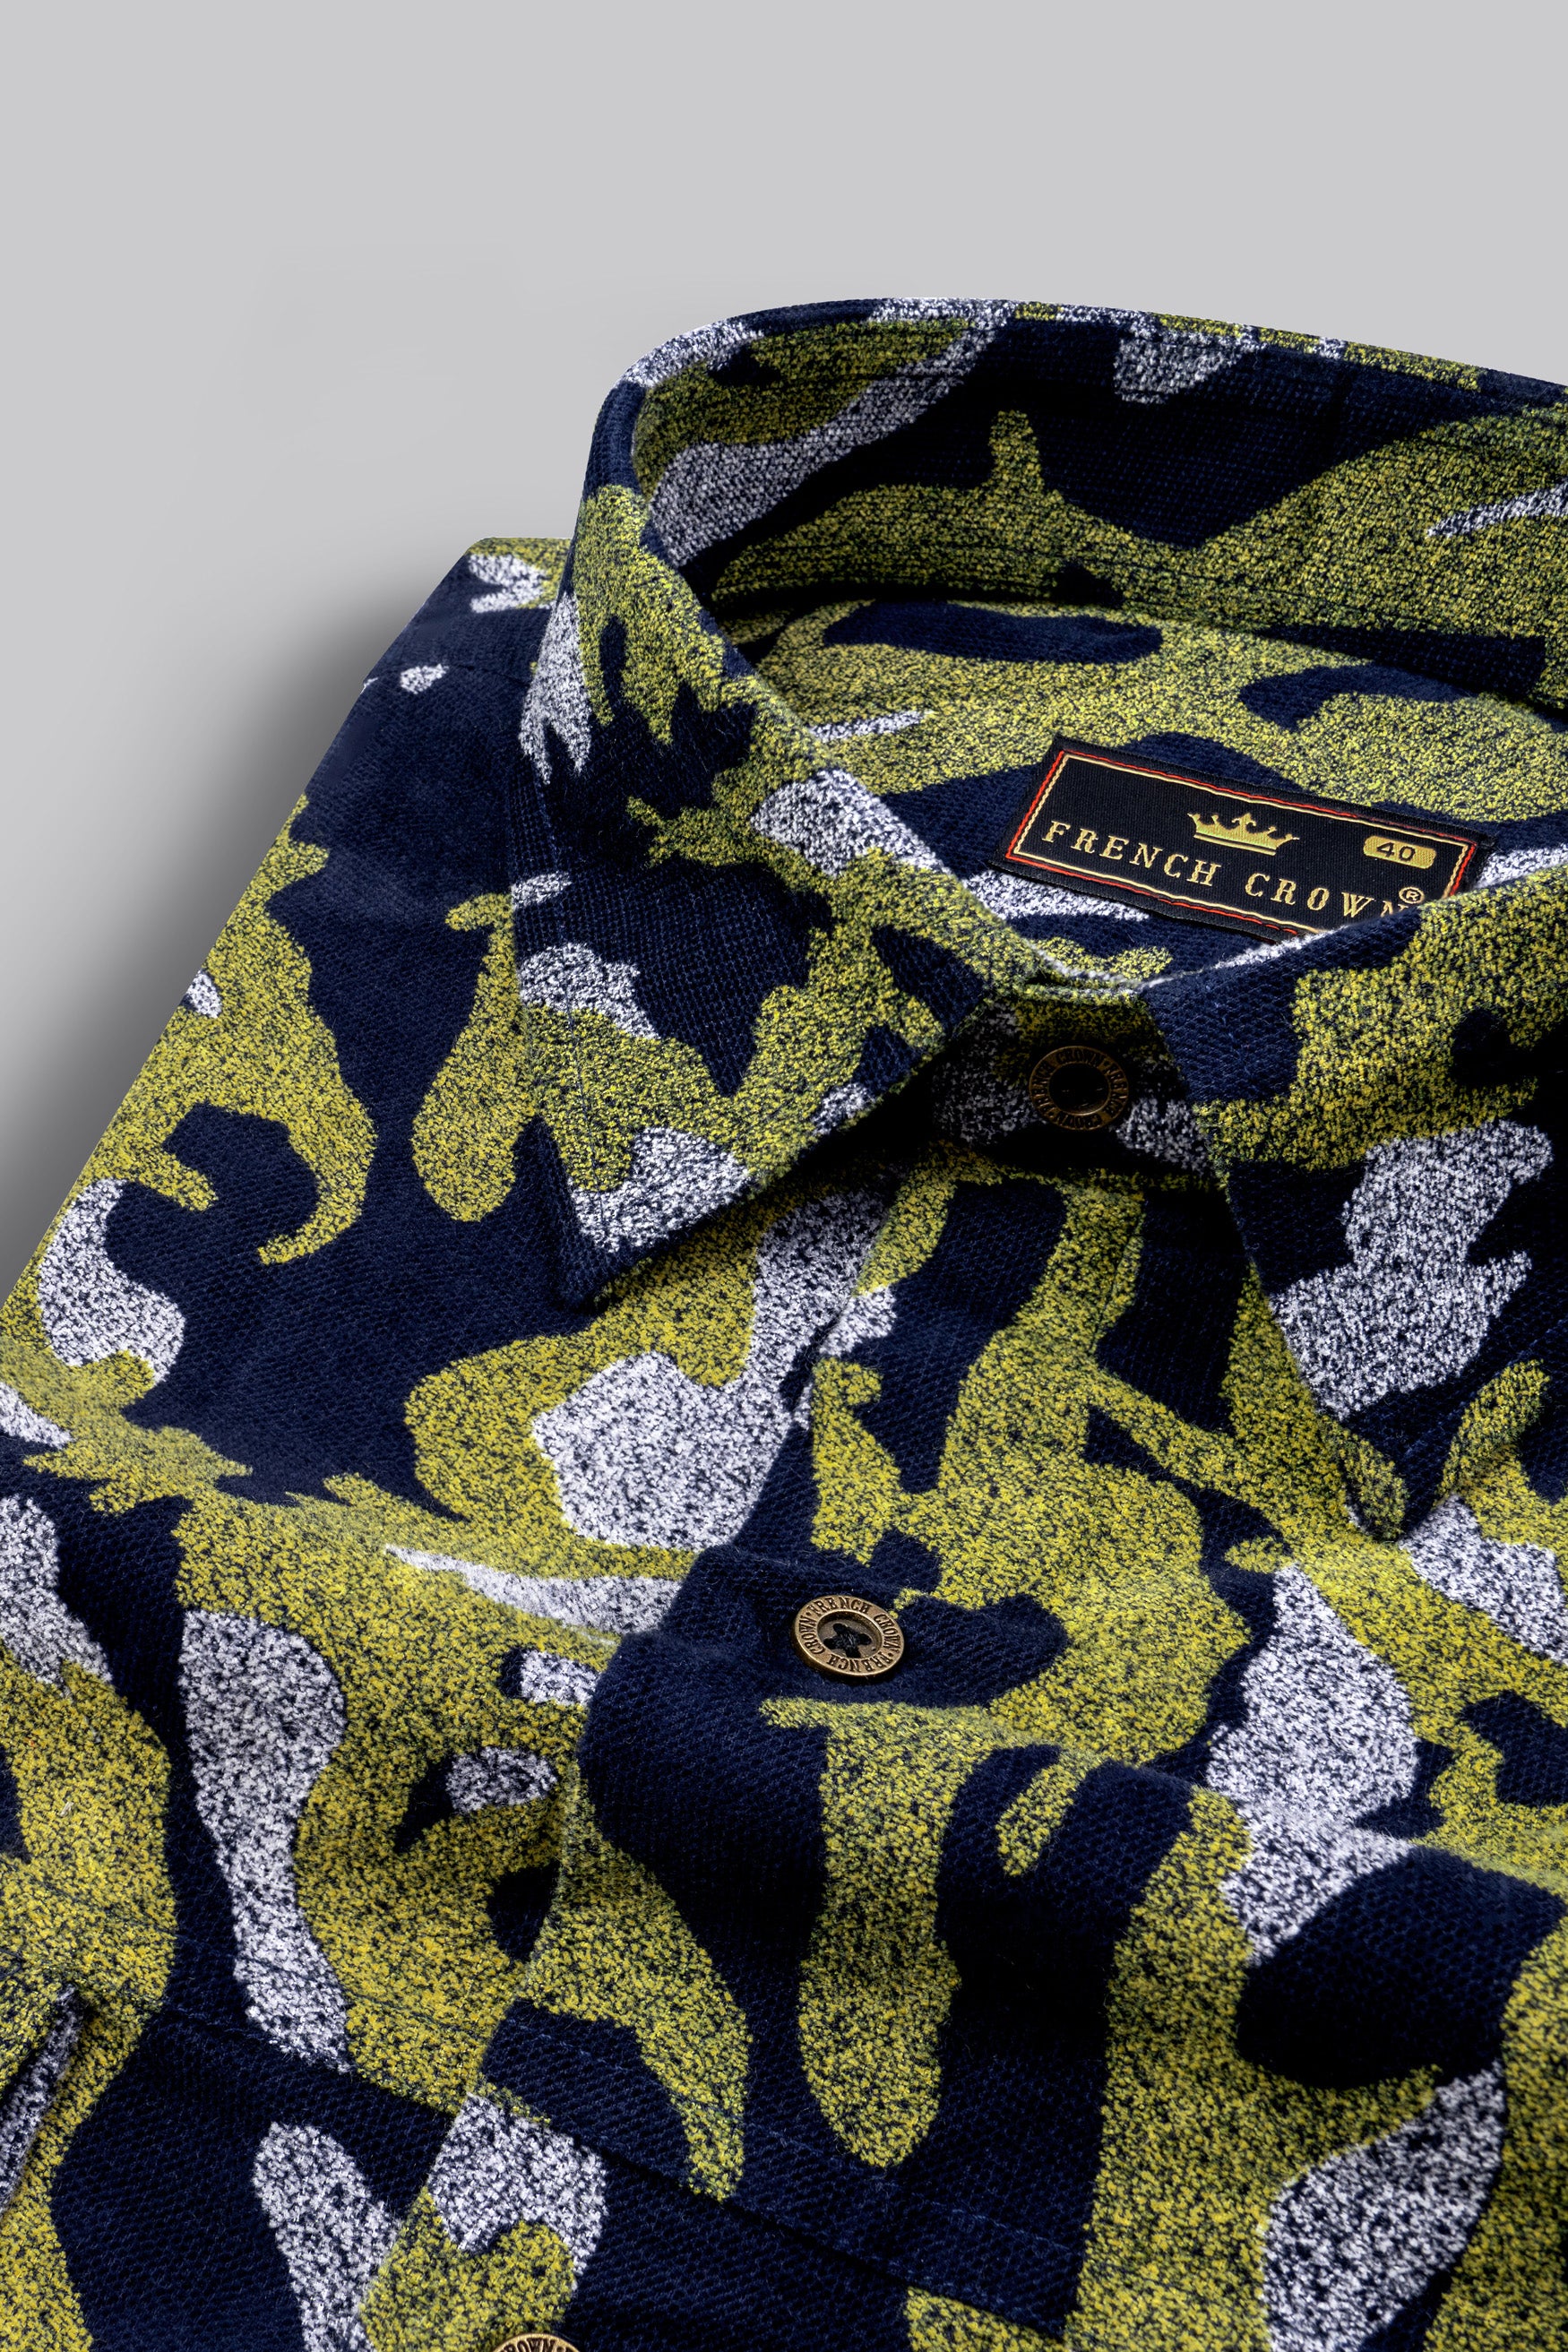 Chelsea Green with Mirage Navy Blue Camouflage Textured Corduroy Shirt